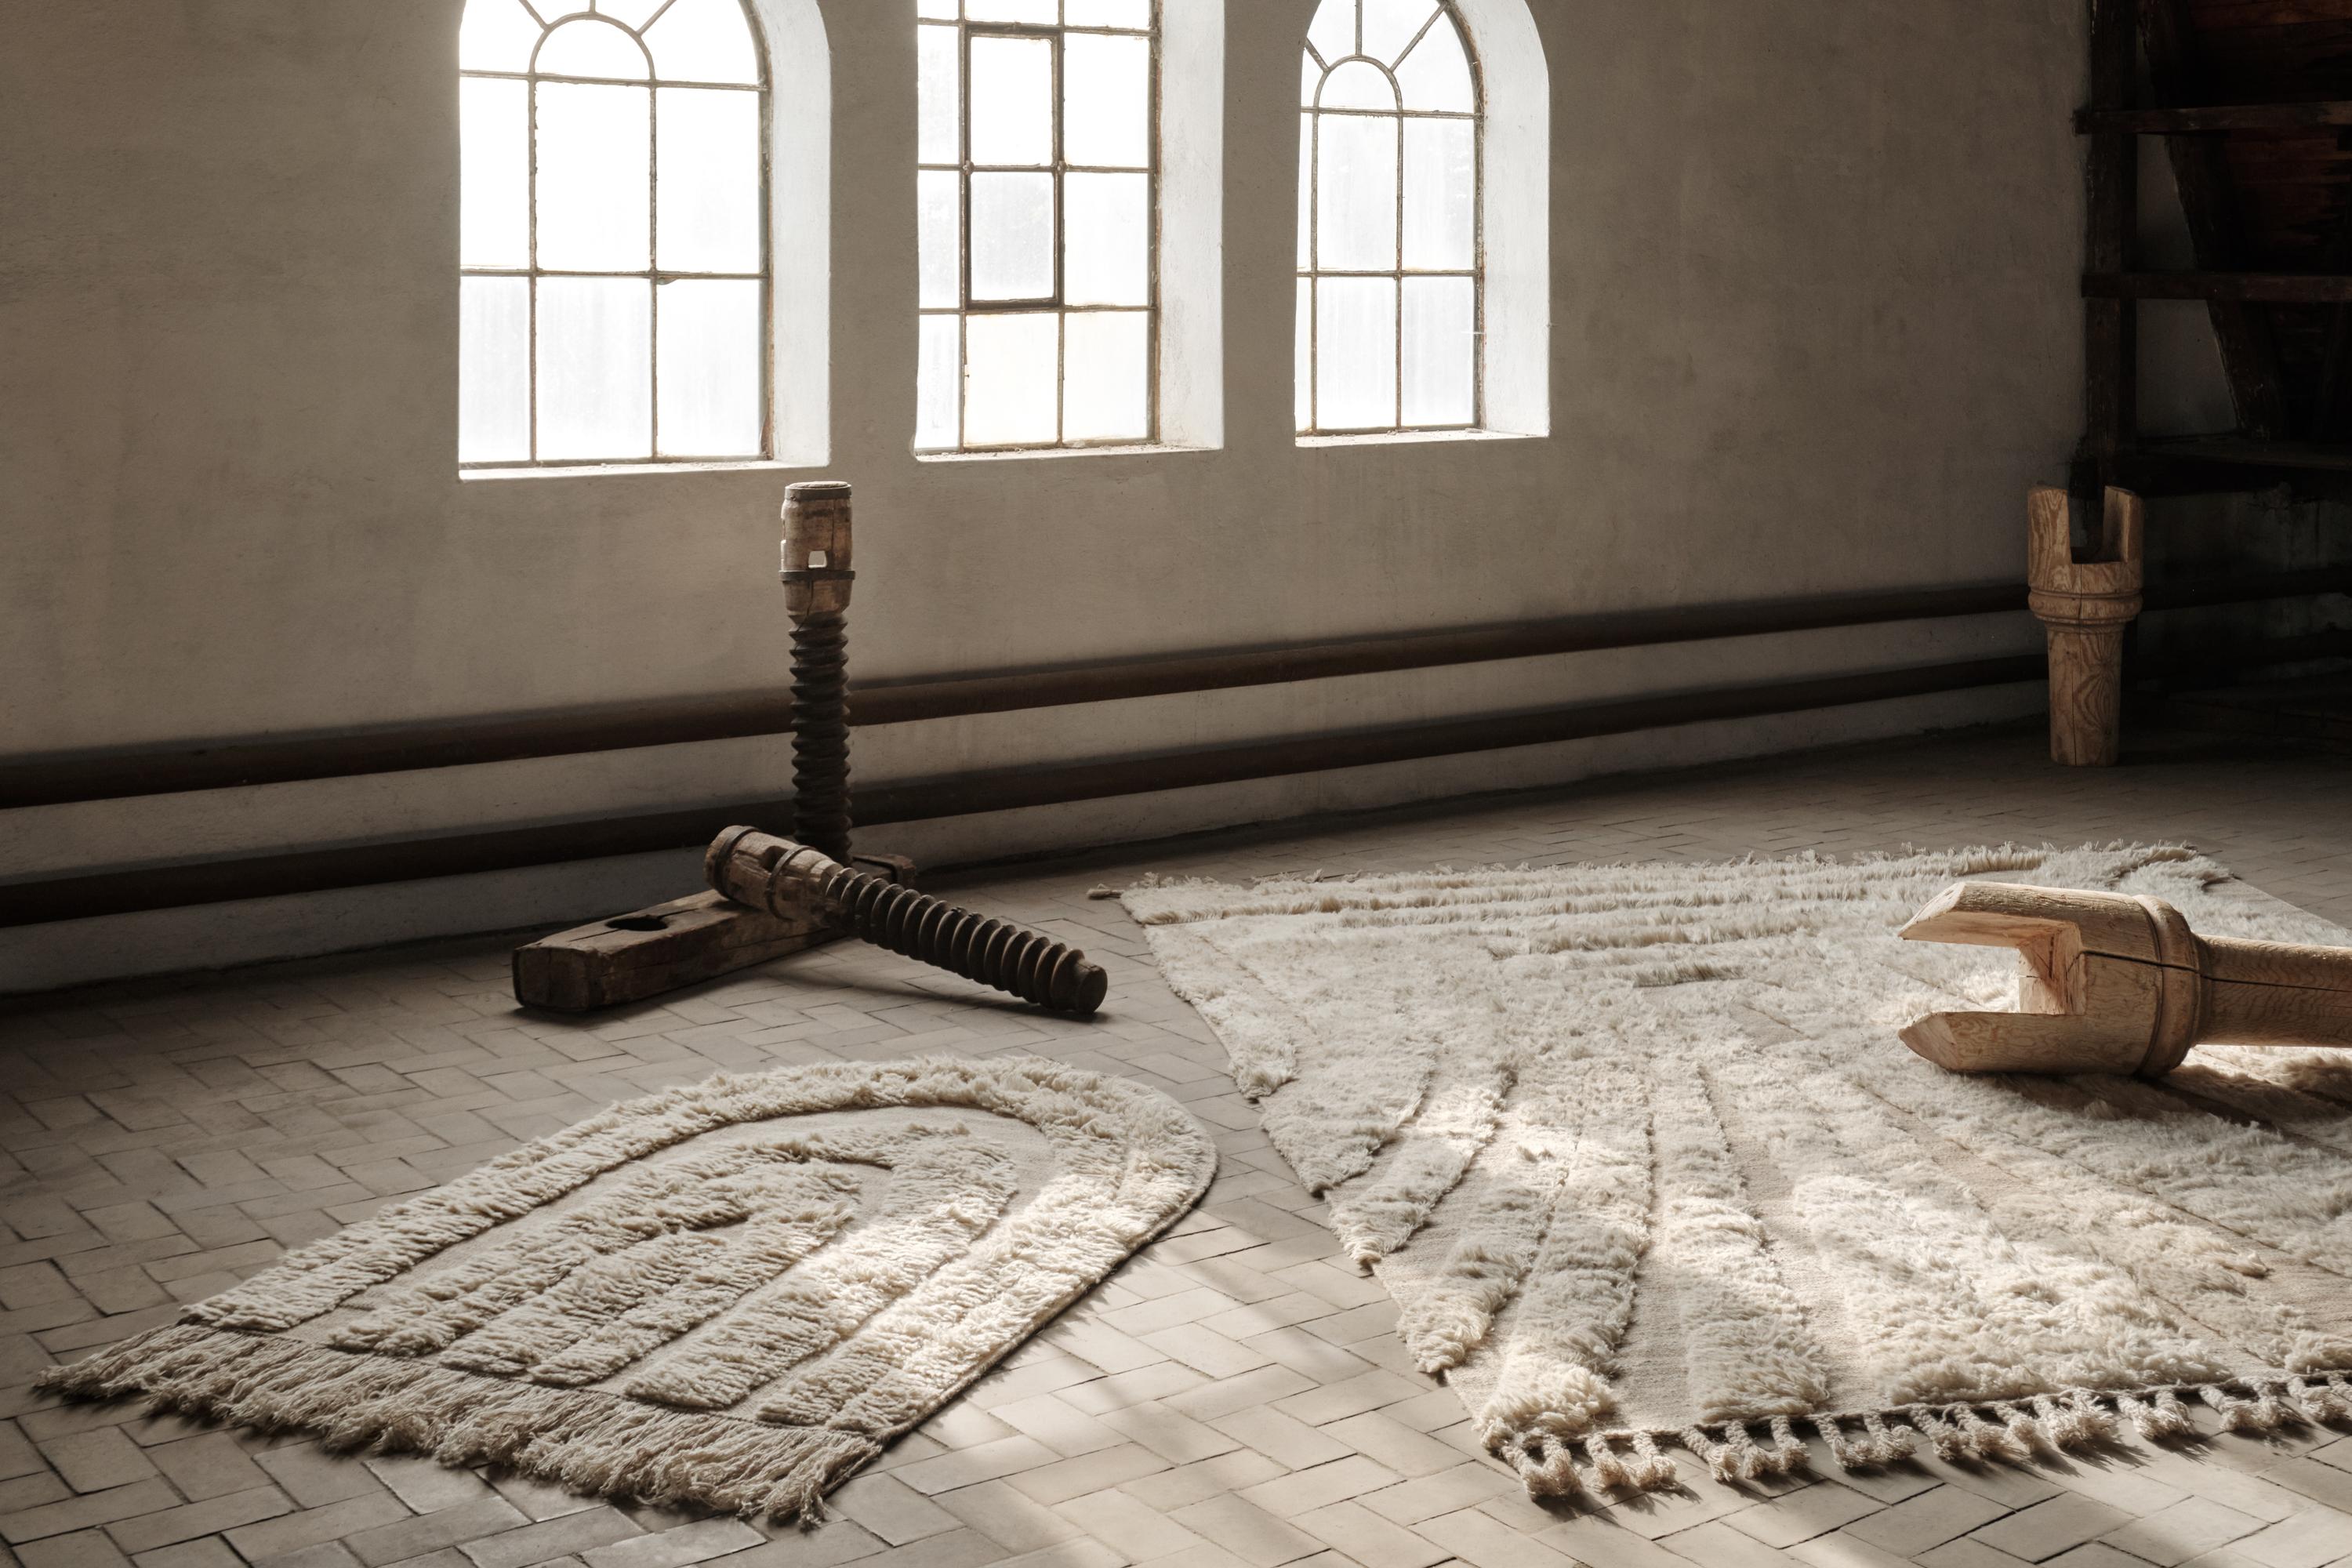 No.02 Rug by Cappelen Dimyr
Dimensions: D220 x H280
Materials: 85% wool 15% cotton

no.02 is a decorative hand-knotted rug in natural wool. The soft irregular pattern creates a vivid and intriguing feel. The rug is made in natural and unbleached